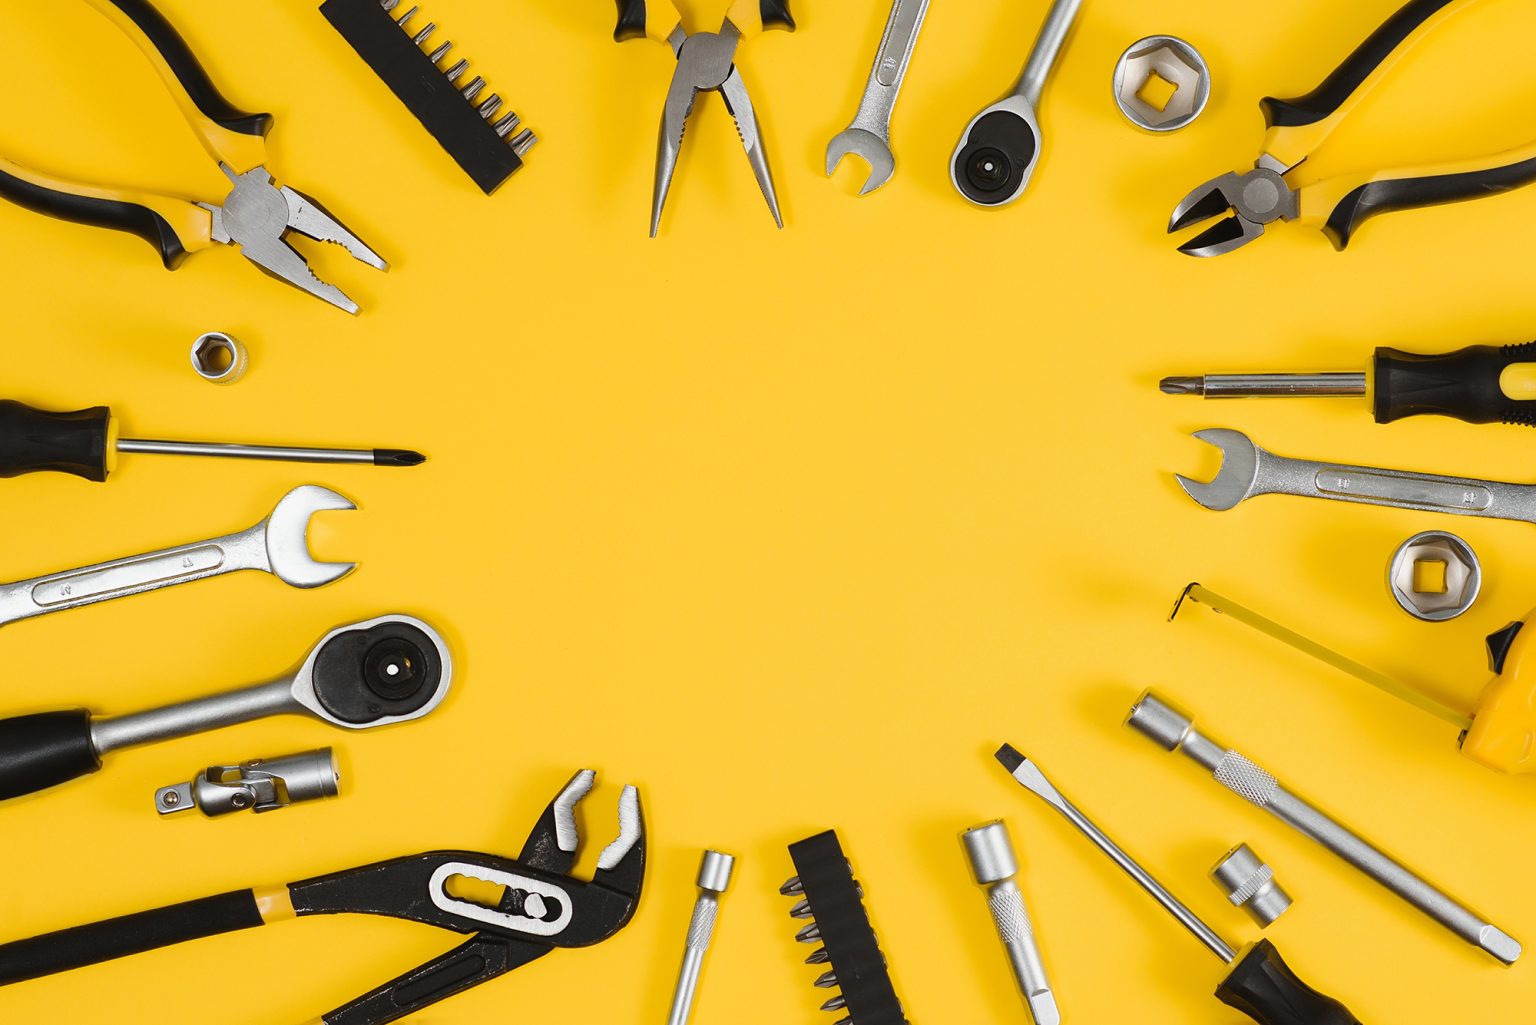 Set of various construction tools on a yellow background